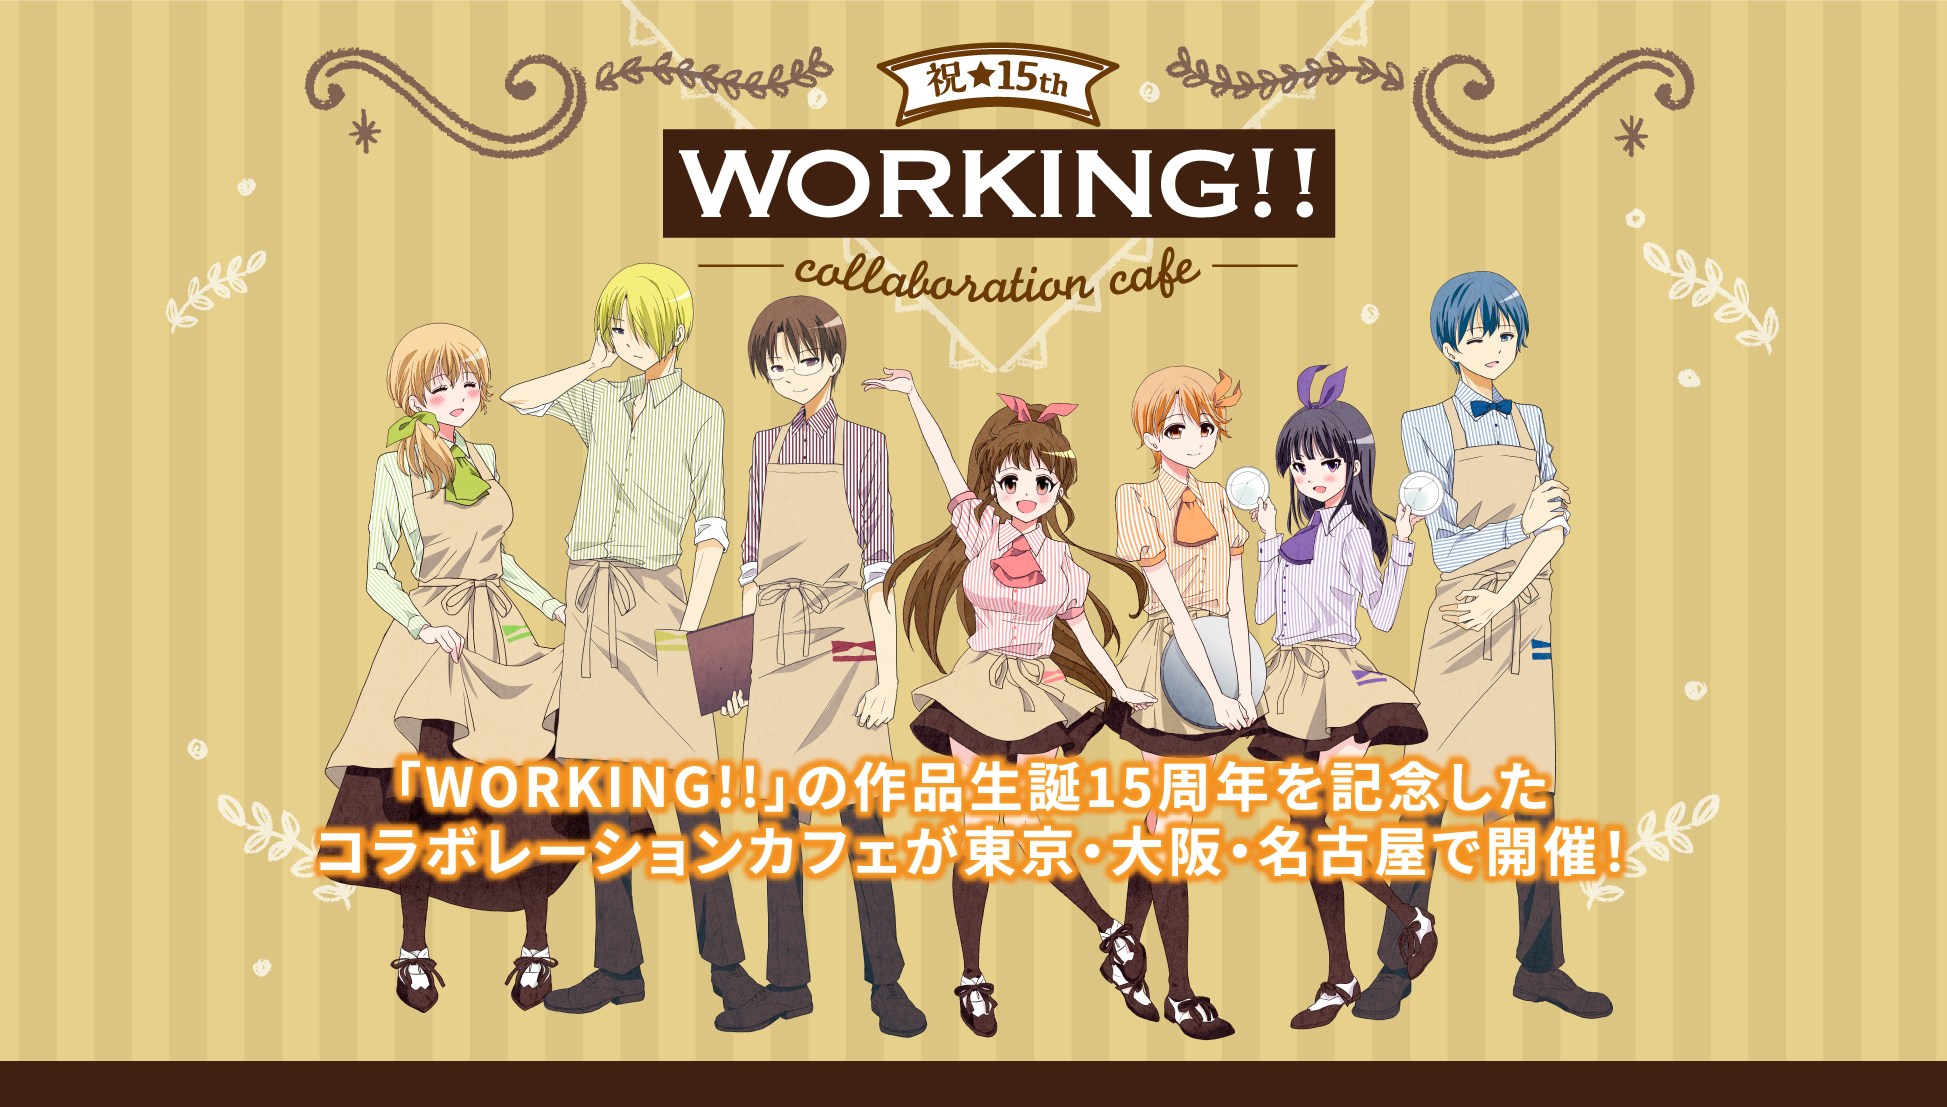 Working Collaboration Cafe 公式サイト